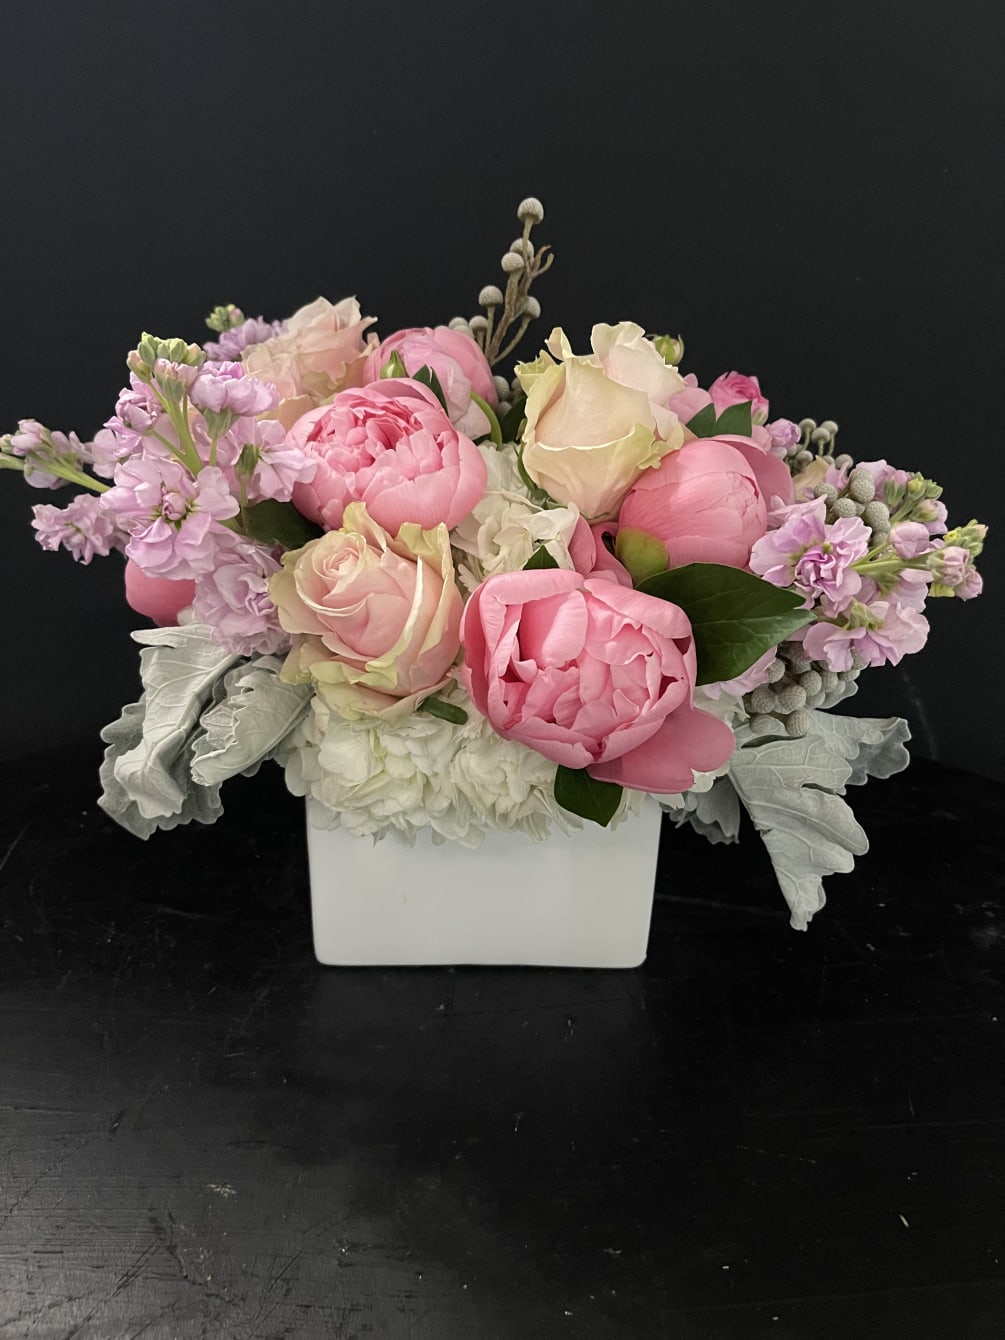 ***No specific delivery time available***
PEONY SIZE WILL VARY DUE TO SEASON. PEONIES